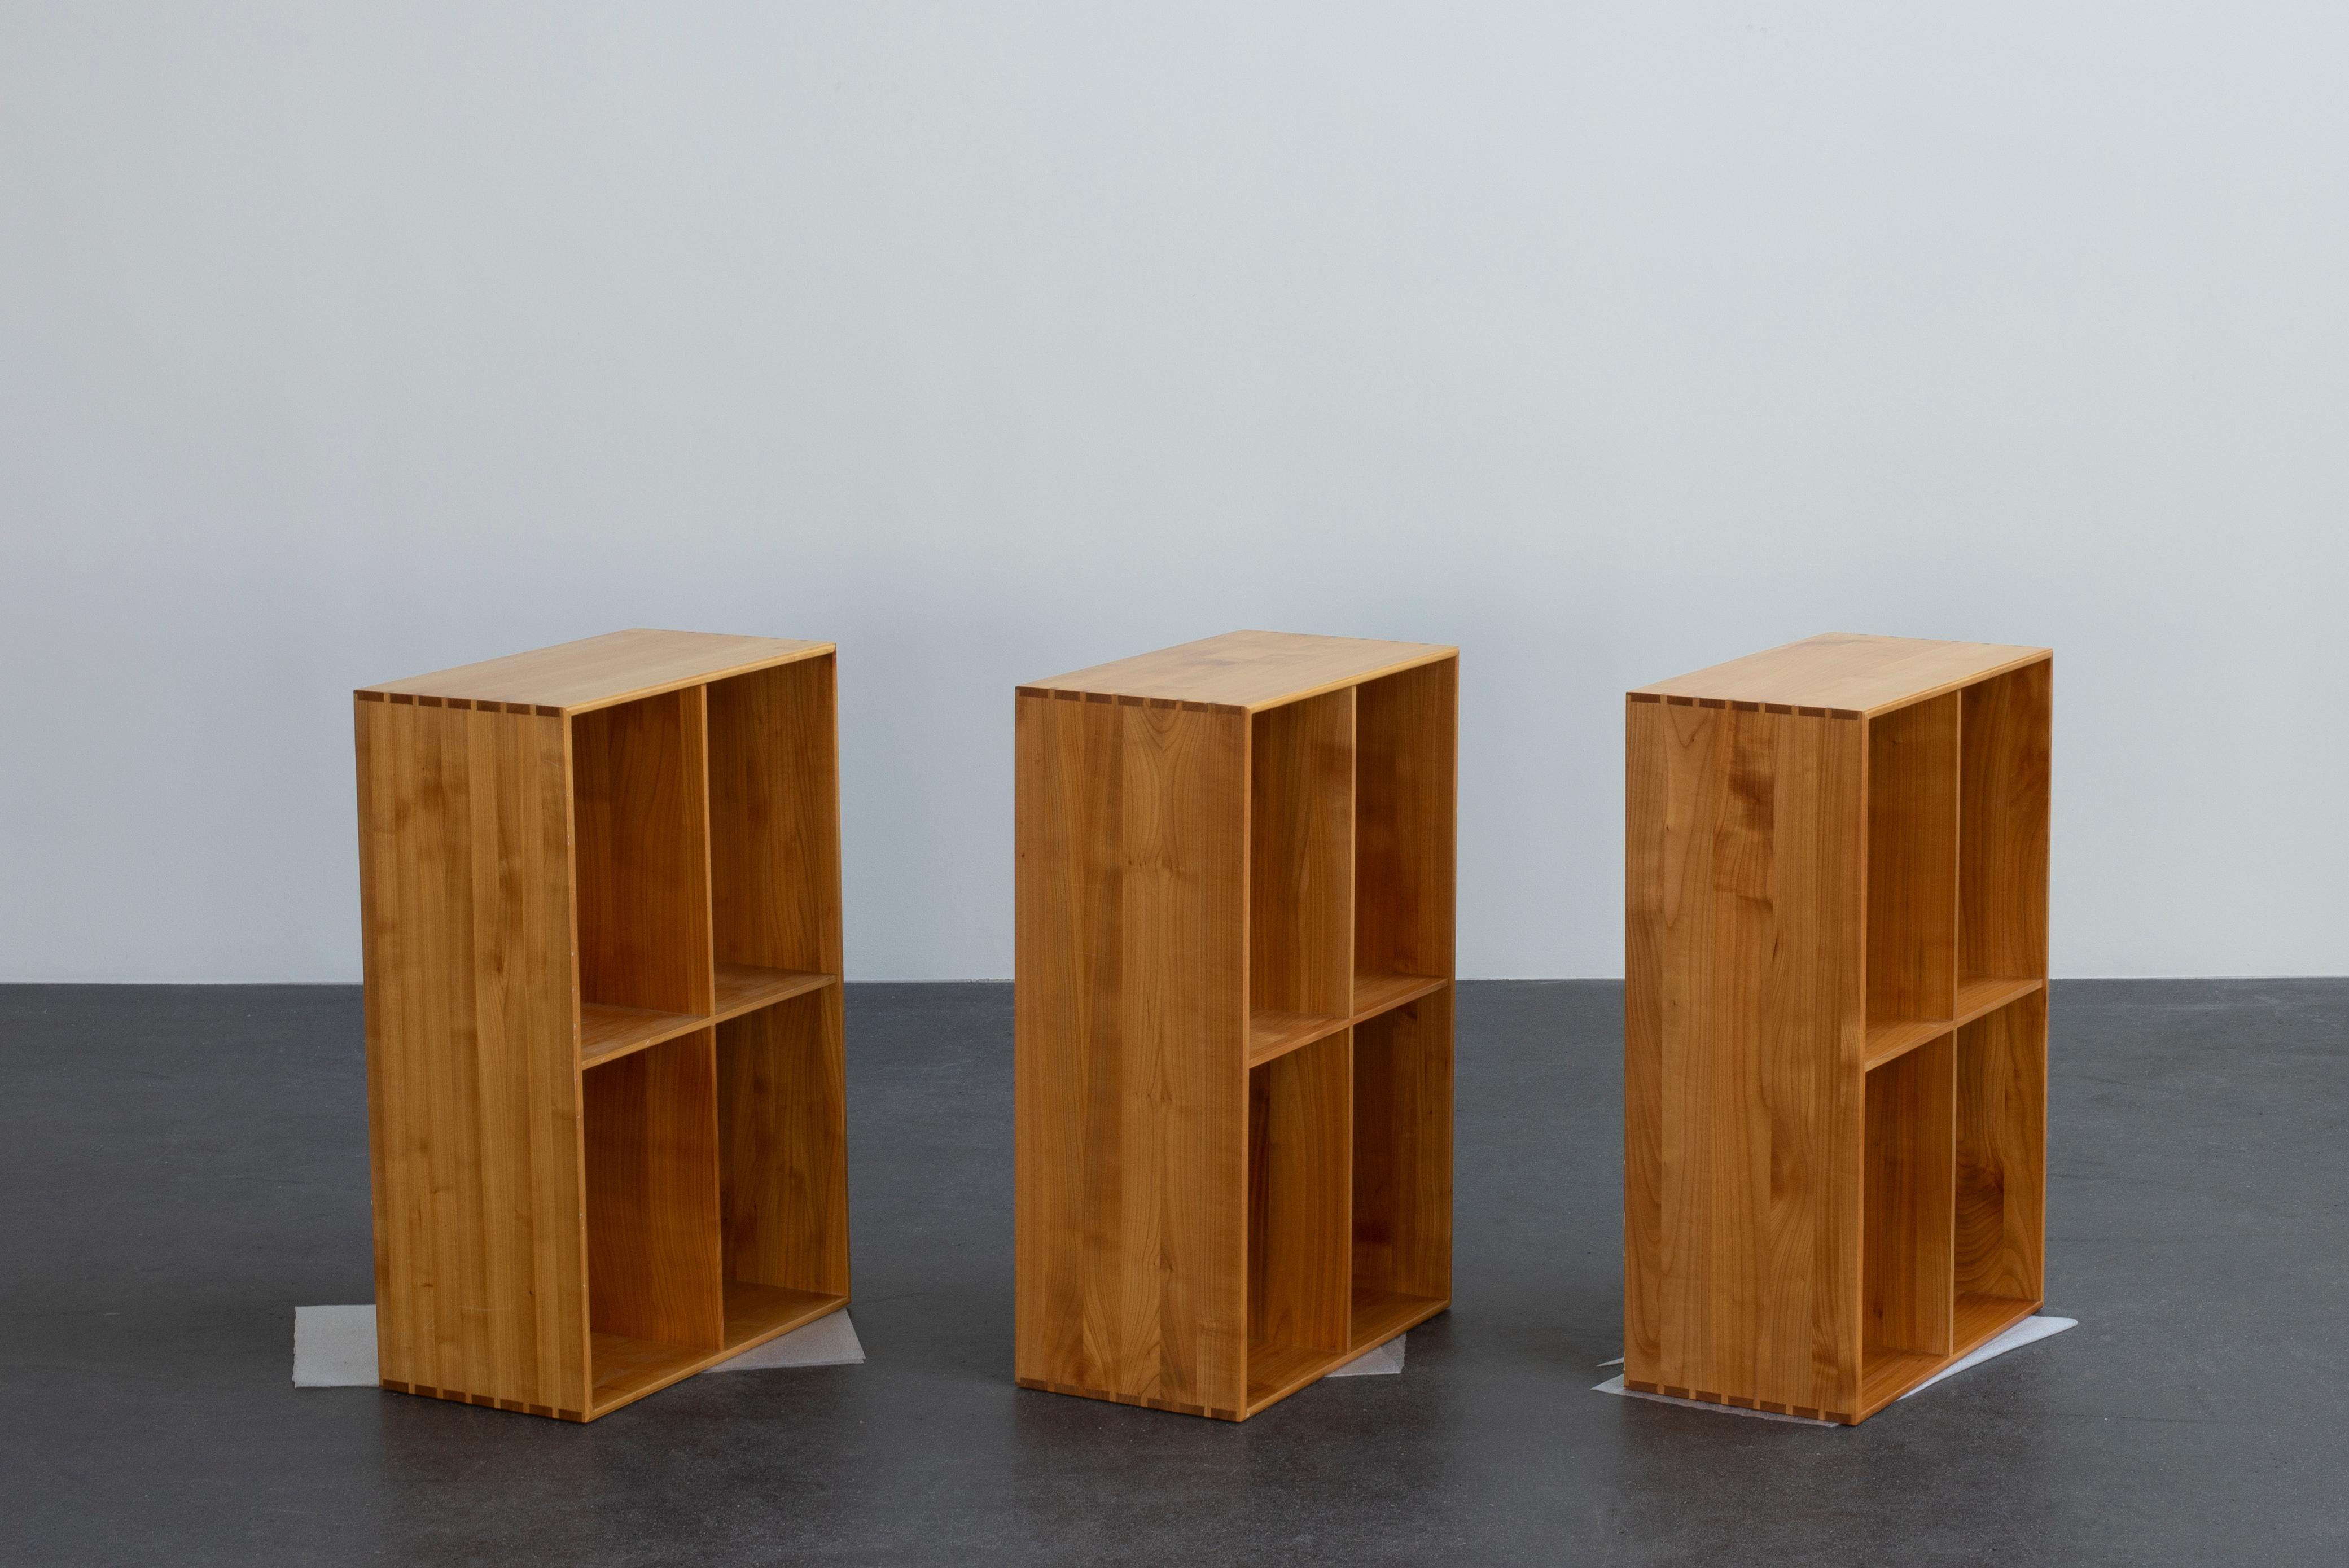 Lacquered Mogens Koch Bookcases in Cherrywood for Rud, Rasmussen